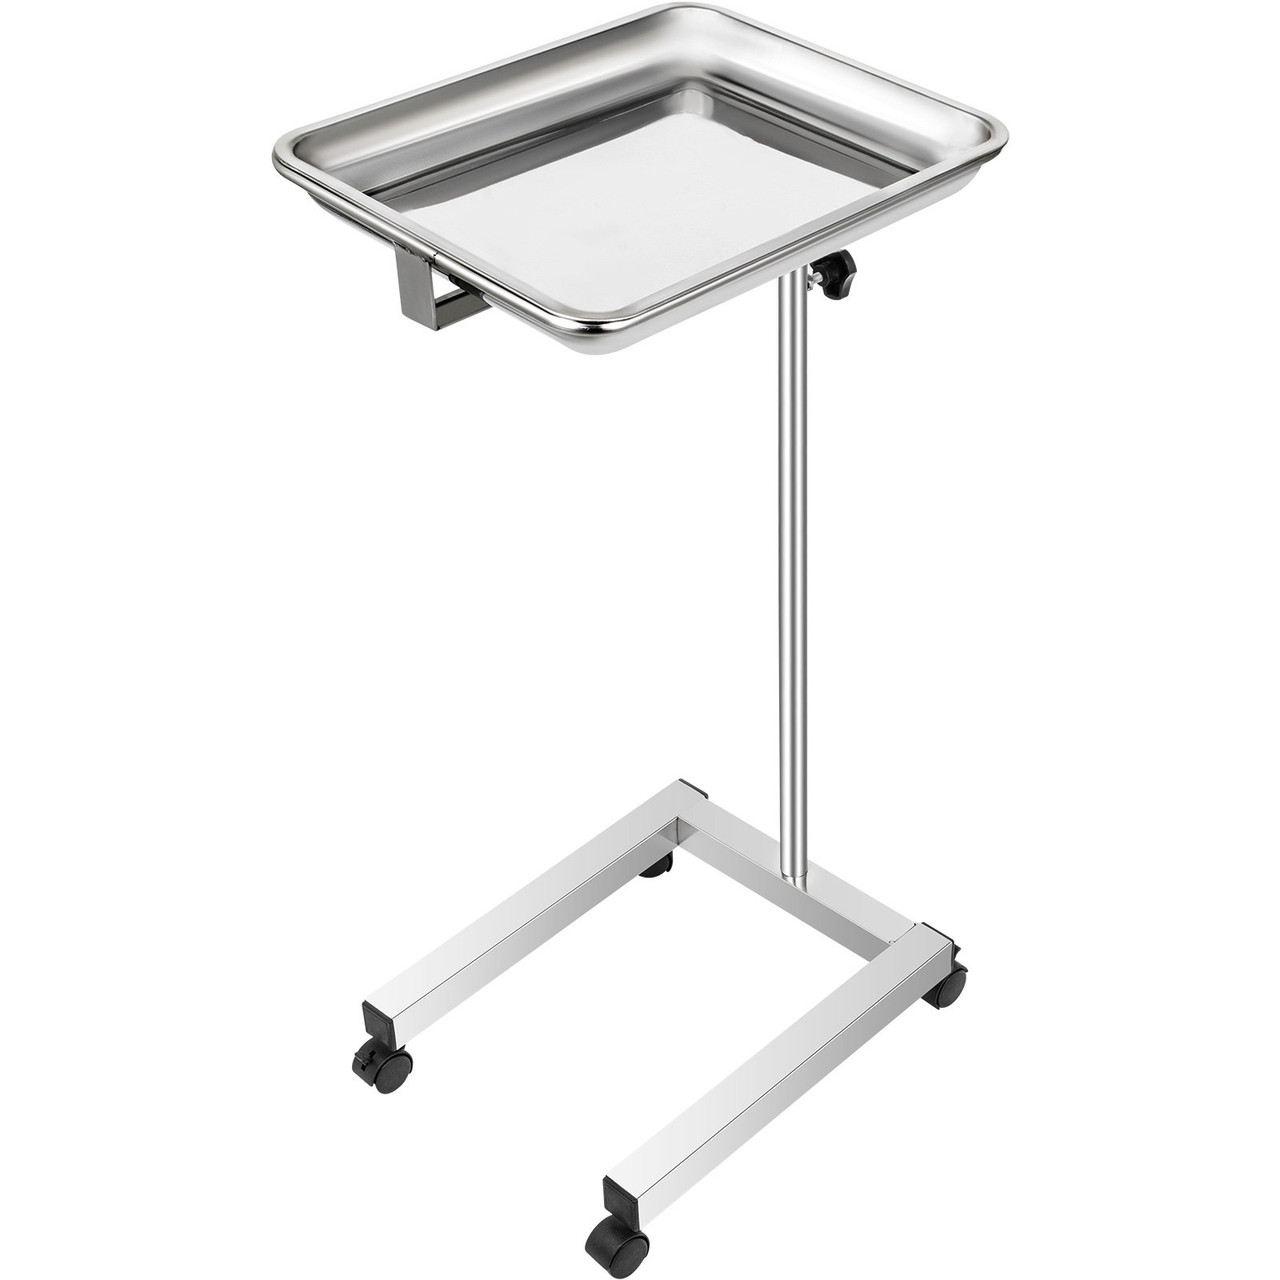 Lab Cart Stainless Steel Mayo Tray Stand 18x14 Inch Trolley Mayo Stand Adjustable Height 32-51 Inch Instrument Tray w/Removable Tray & 4 Omnidirectional Wheels for Home Equipment Personal Care